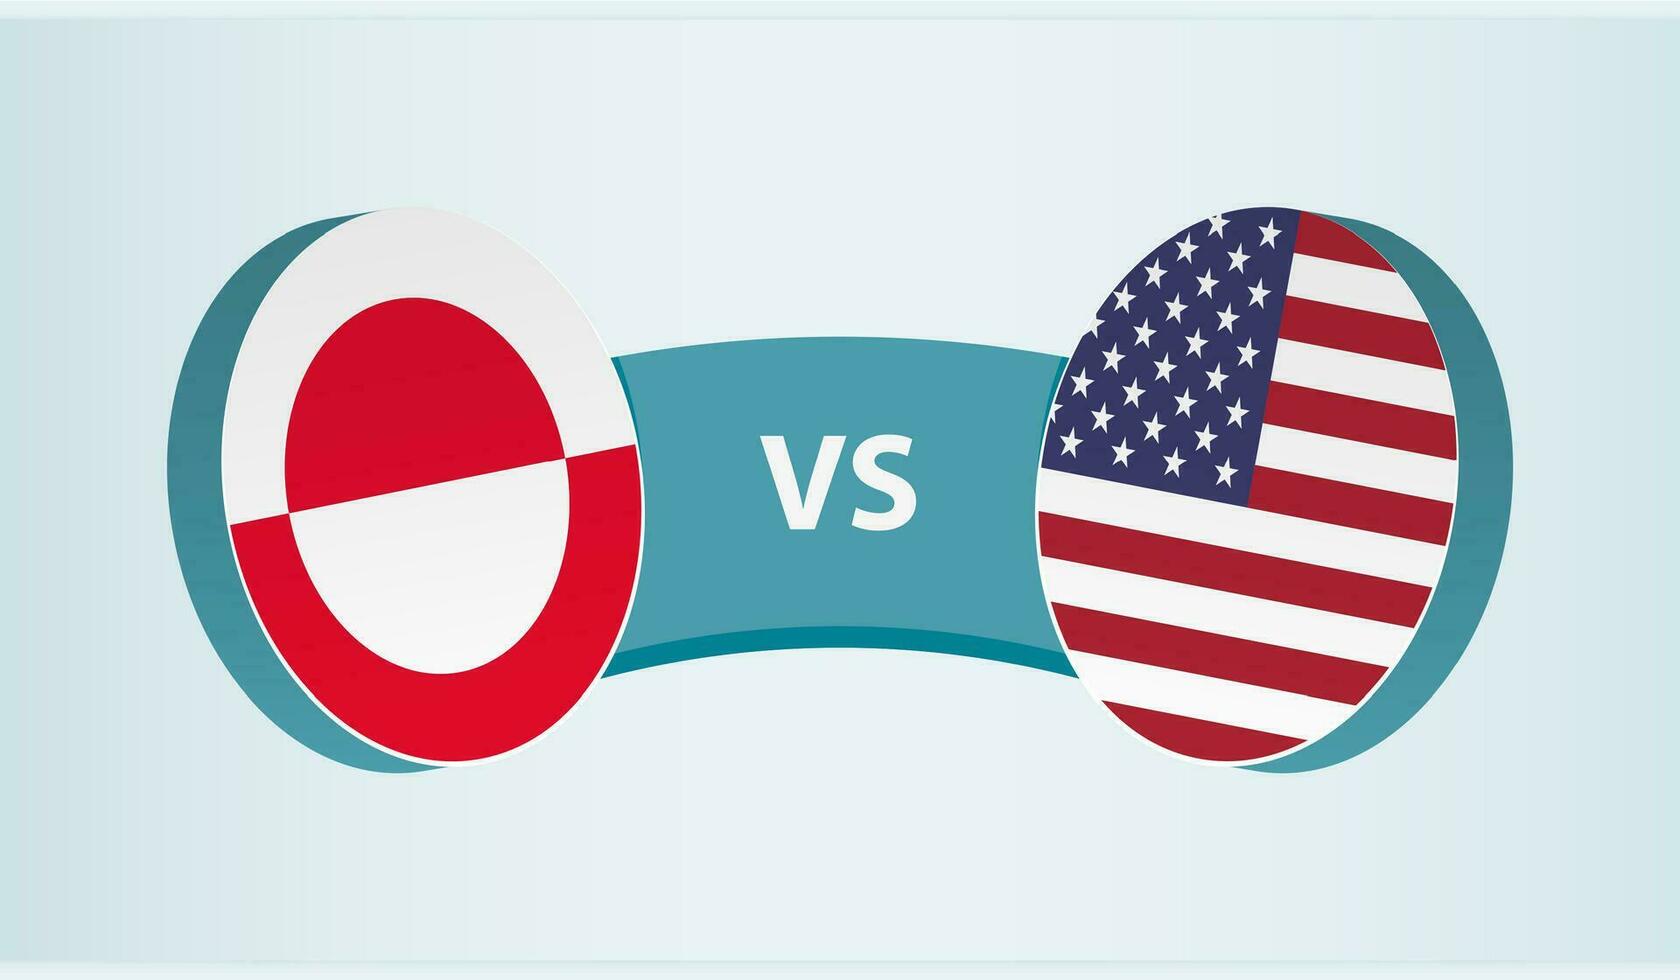 Greenland versus USA, team sports competition concept. vector